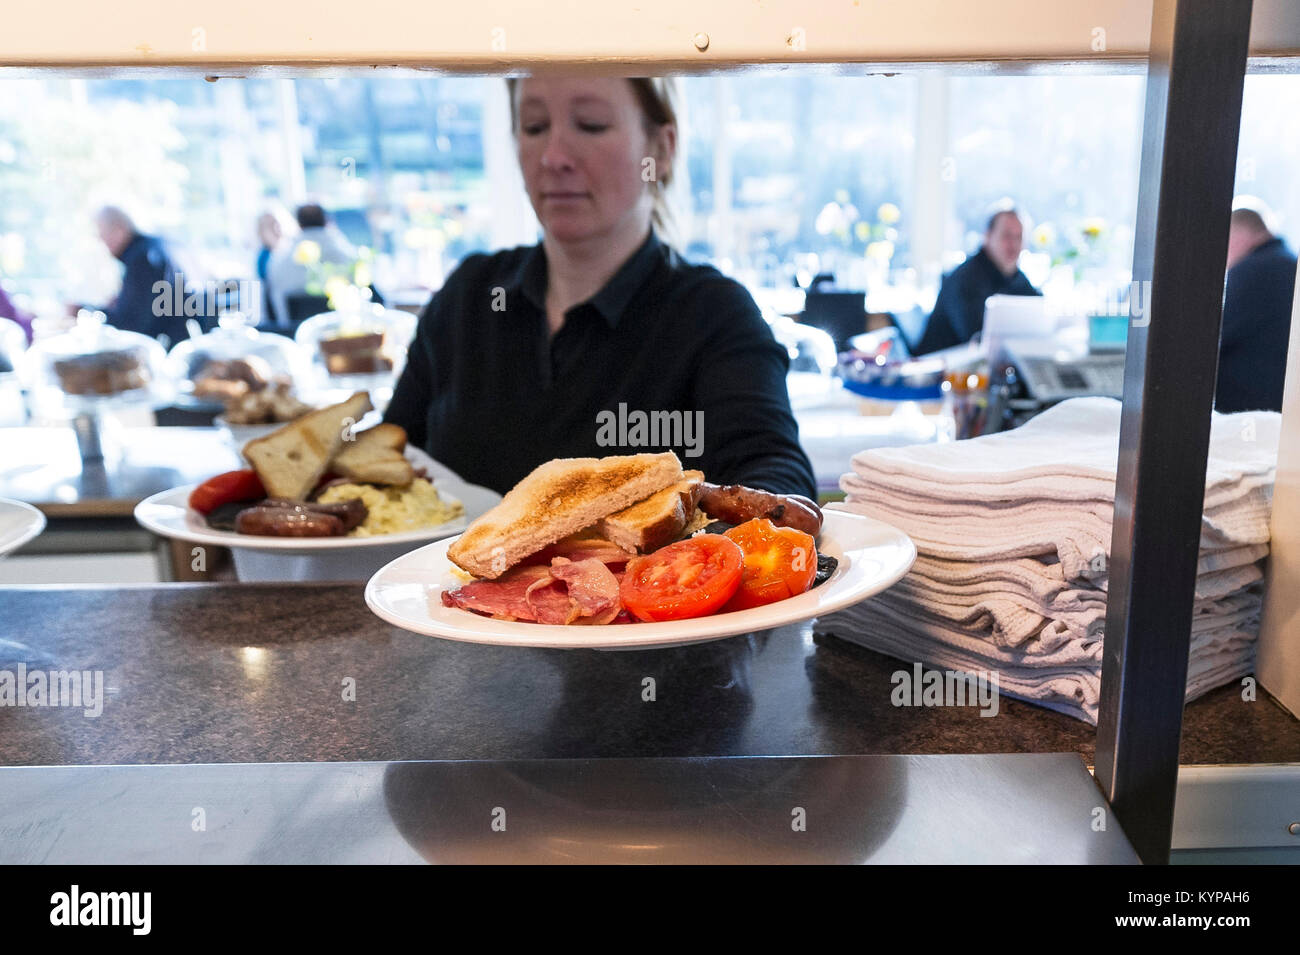 Food preparation - two full english breakfasts collected at the pass in a restaurant Stock Photo